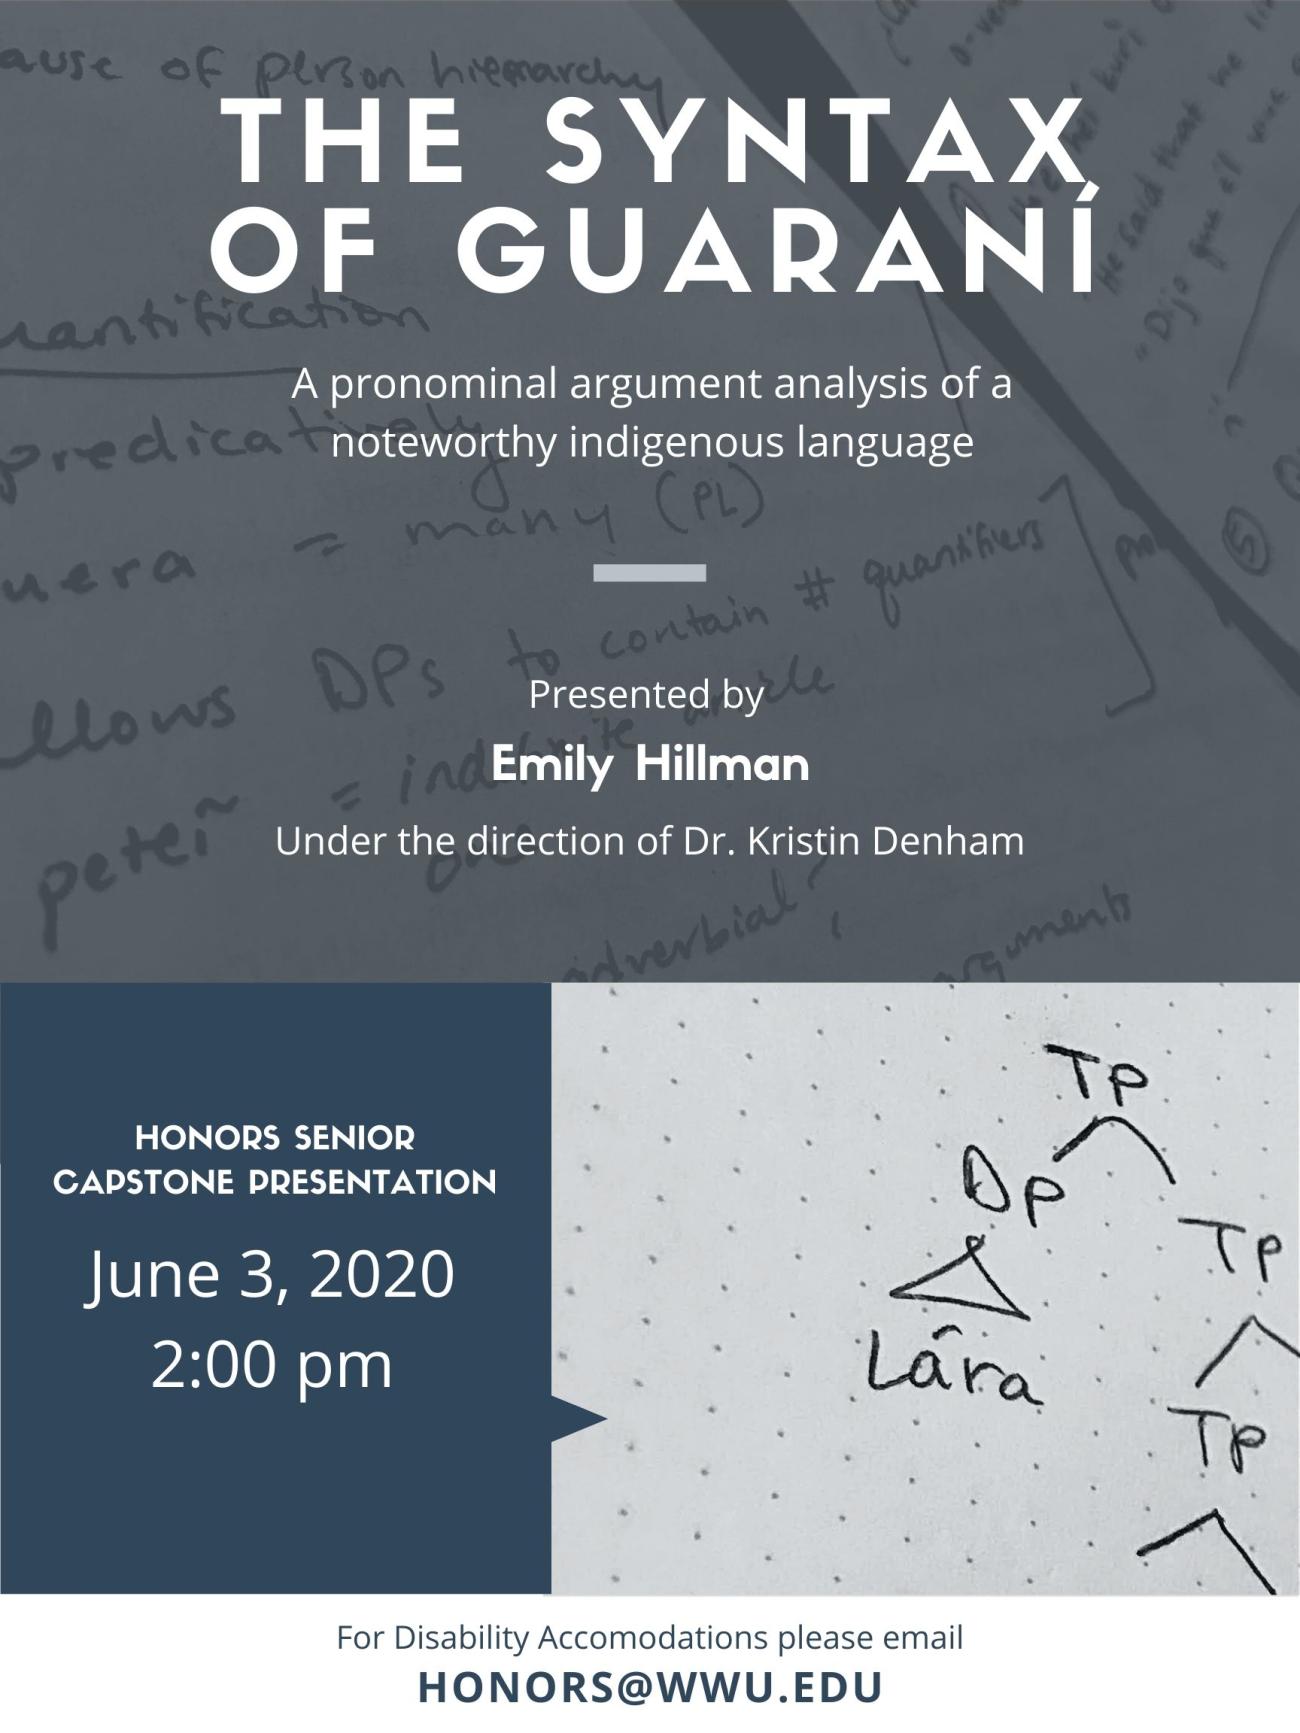 Image: 2 up-close photos of the presenter's notes on the syntax of the indigenous language Guaraní, with information on determiner quantification, the person hierarchy, and a syntax tree. Text: "The Syntax of Guaraní" "A pronominal argument analysis of a noteworthy indigenous language." "Presented by Emily Hillman, under the direction of Dr. Kristin Denham" "Honors Senior Capstone Presentation, June 3, 2020, 2:00 pm" "For Disability Accommodations please email honors@wwu.edu."